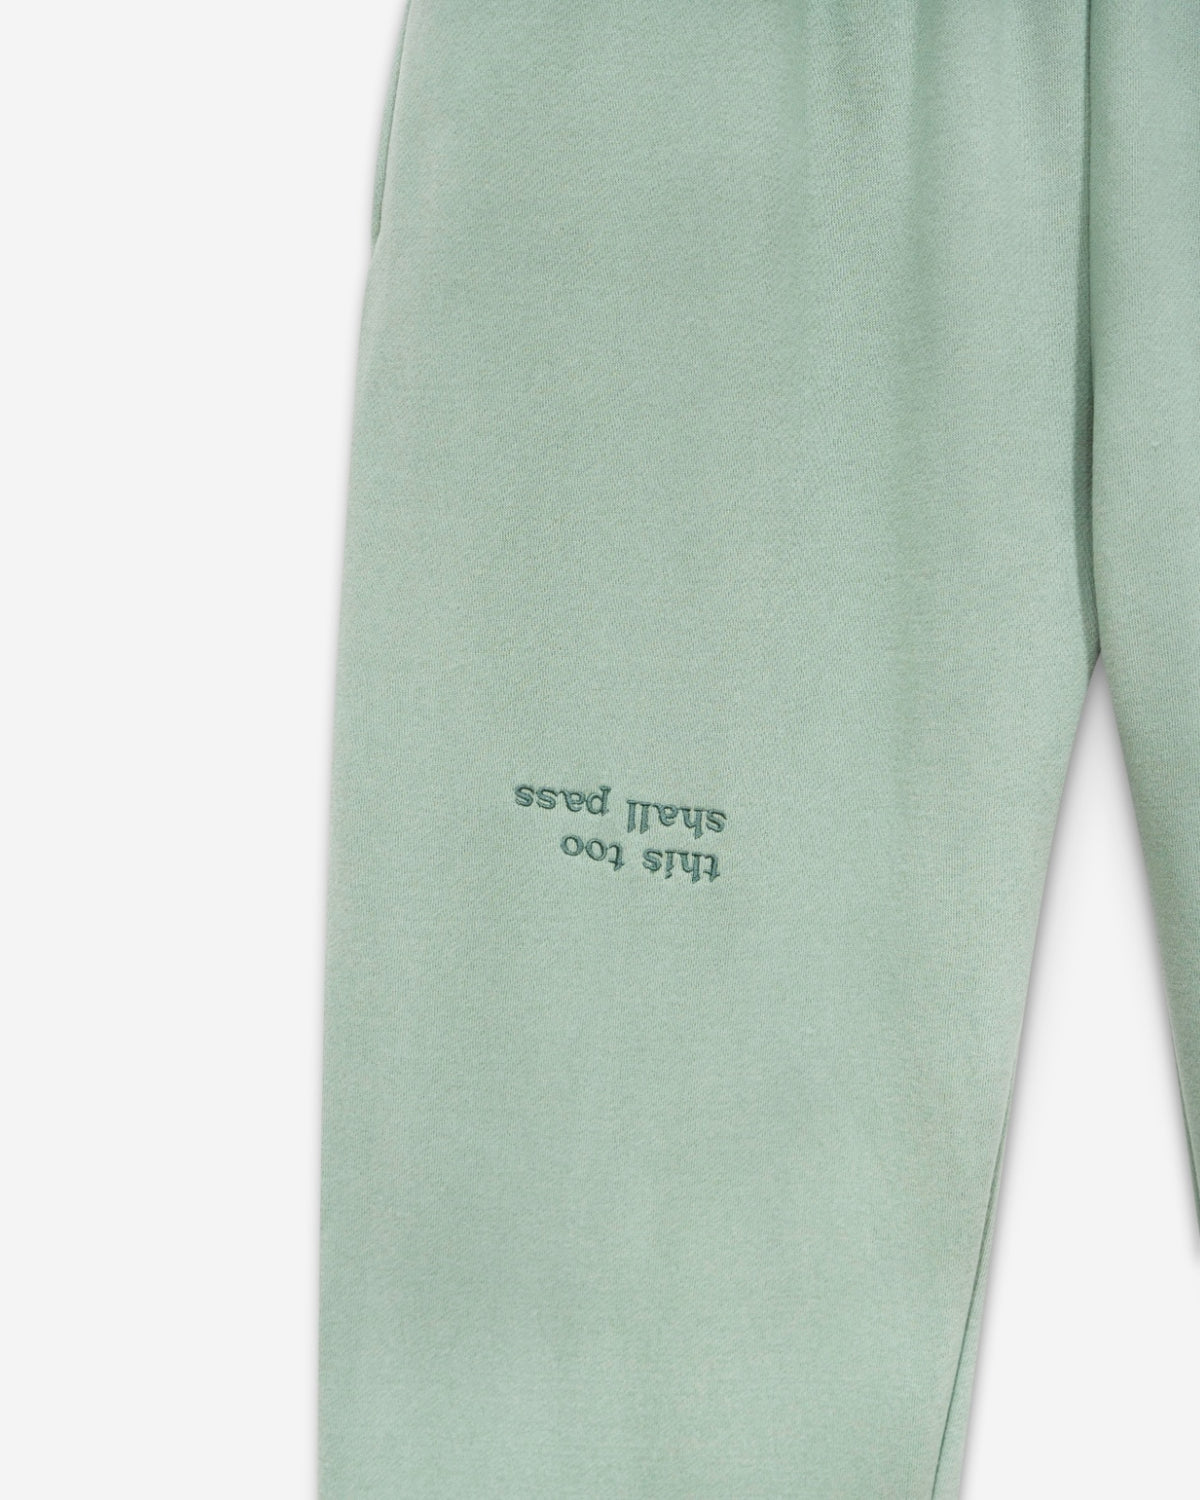 Anxious (this too shall pass) Sweatpants